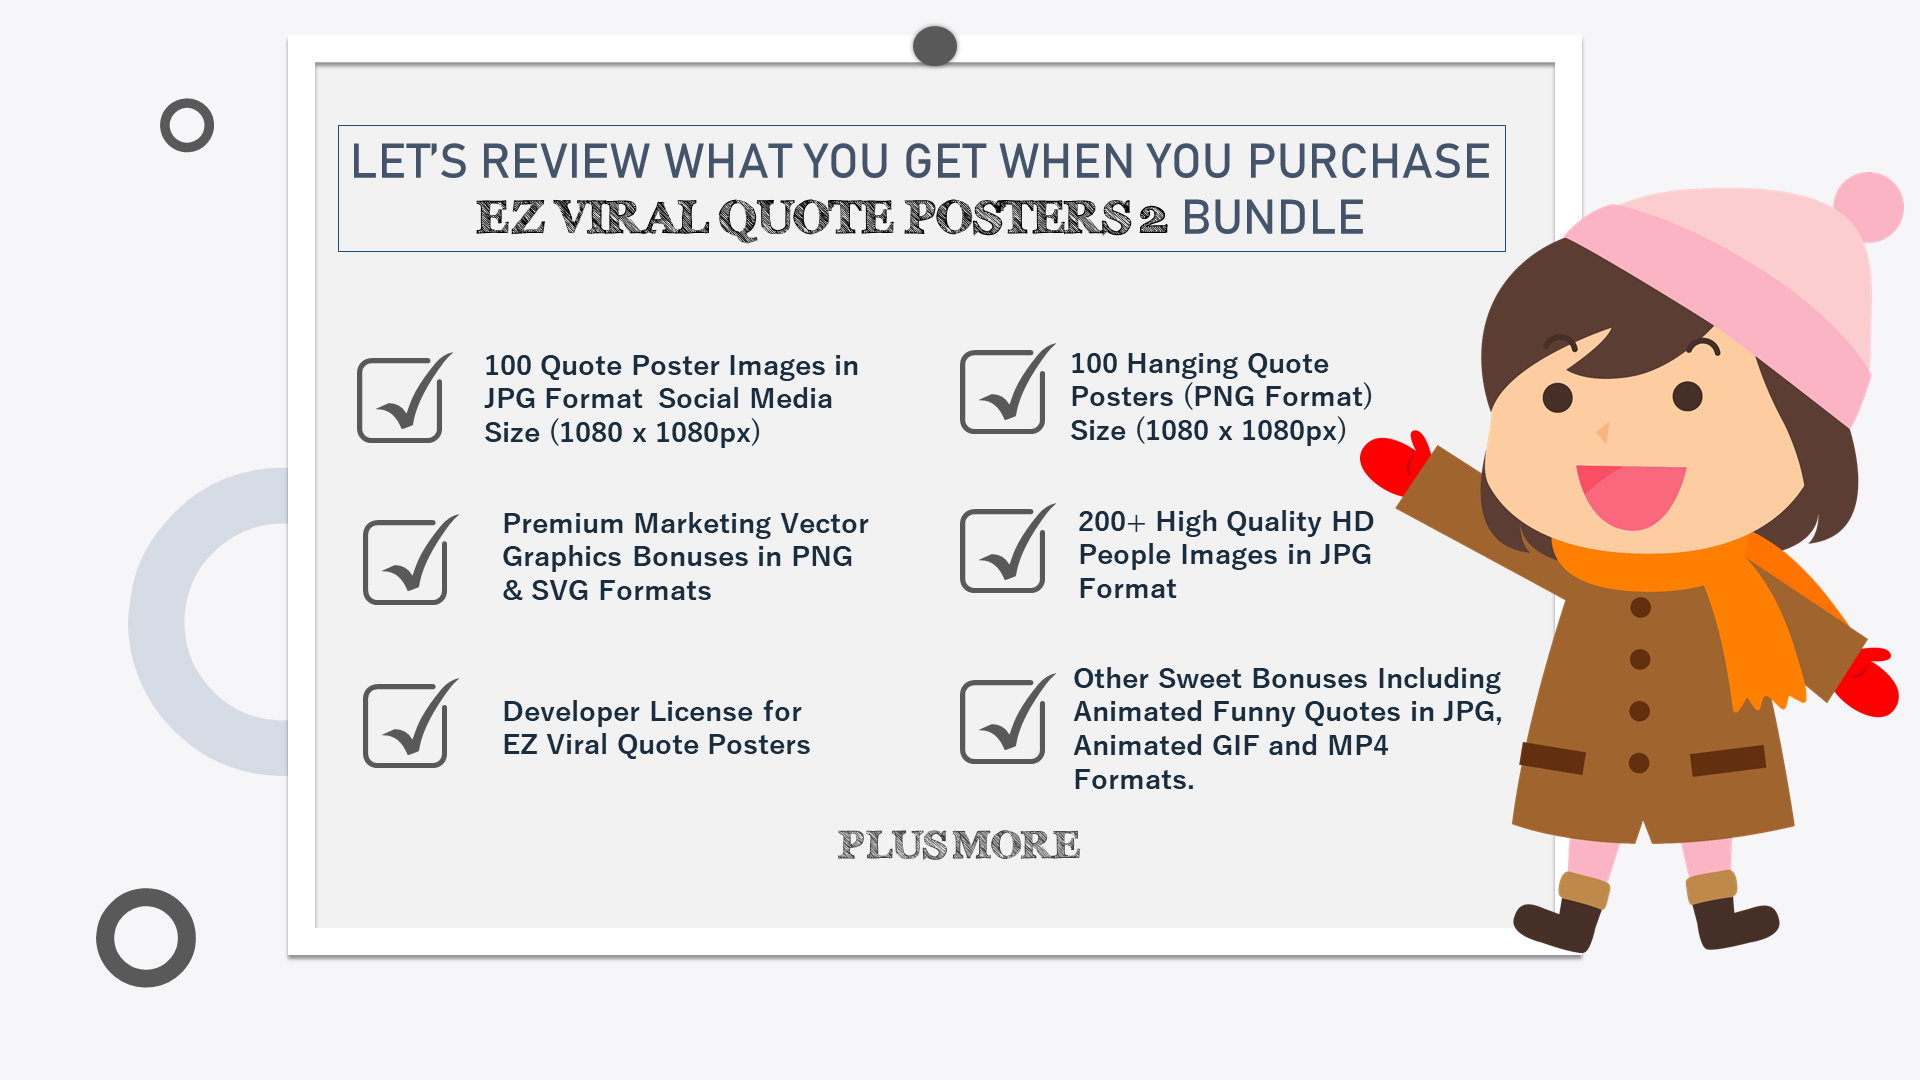 ez-viral-quote-posters-2-overview